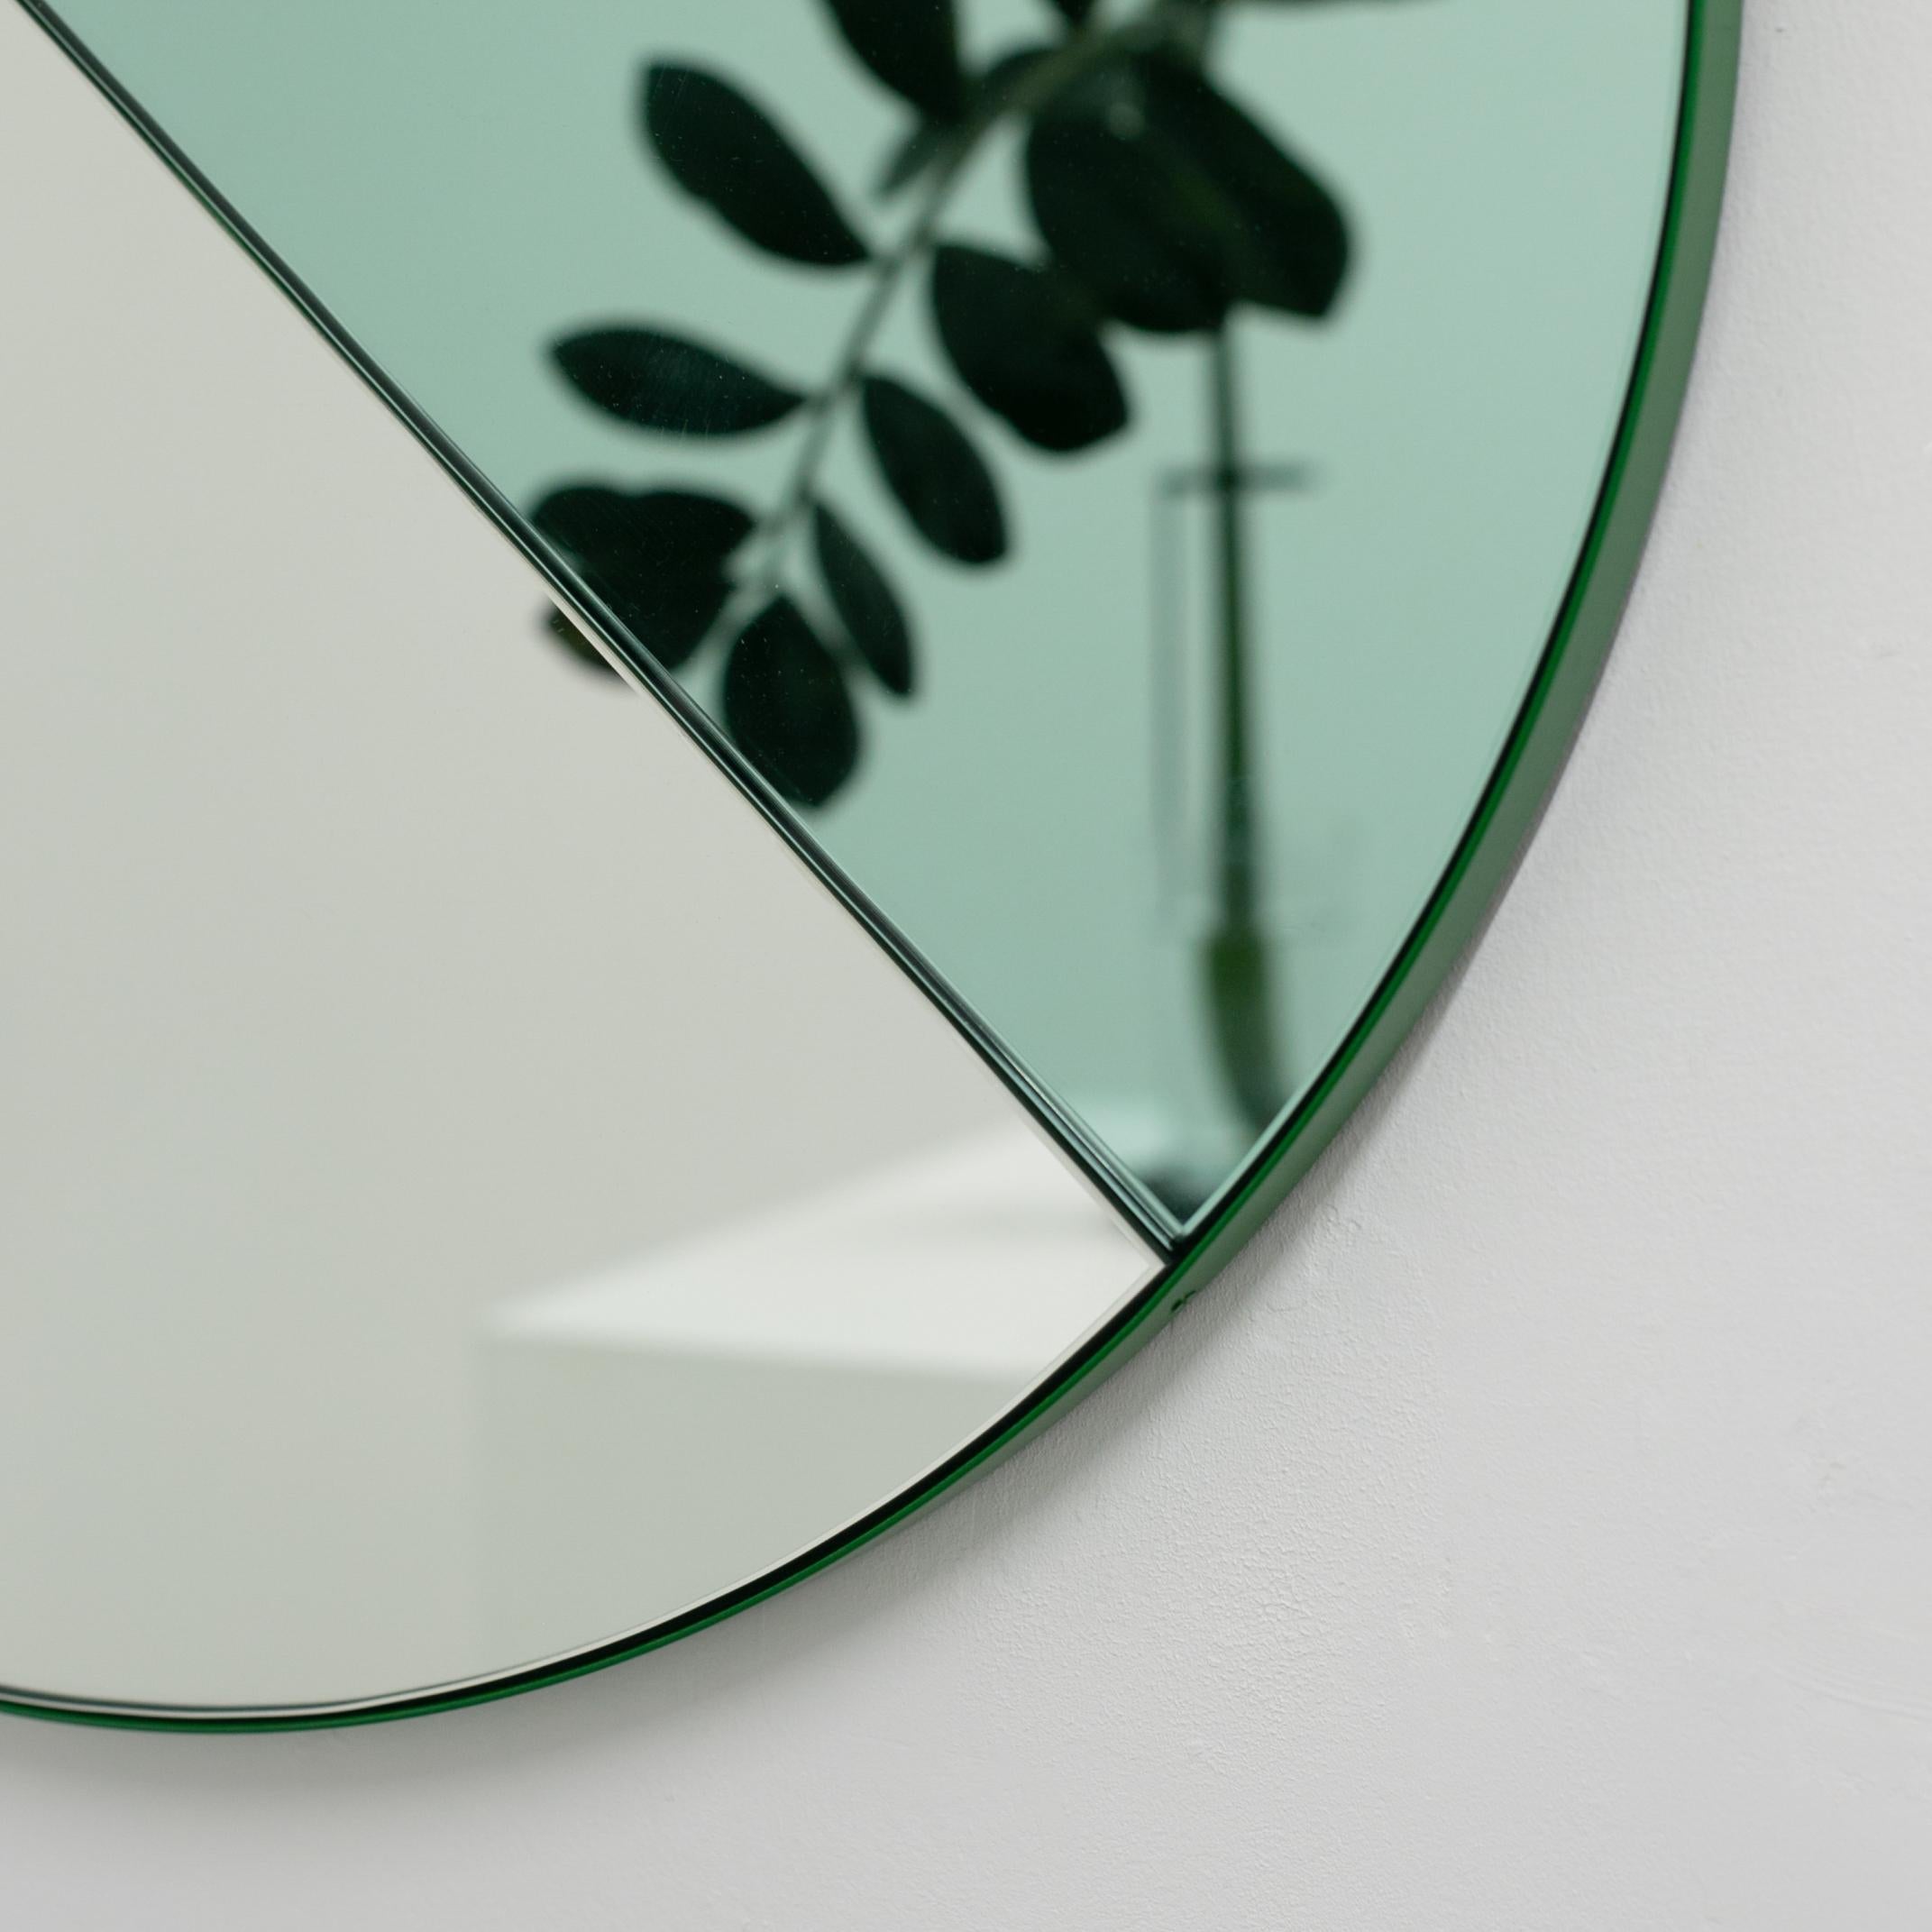 Orbis Dualis Mixed 'Green + Silver' Round Mirror with Green Frame, Small 1